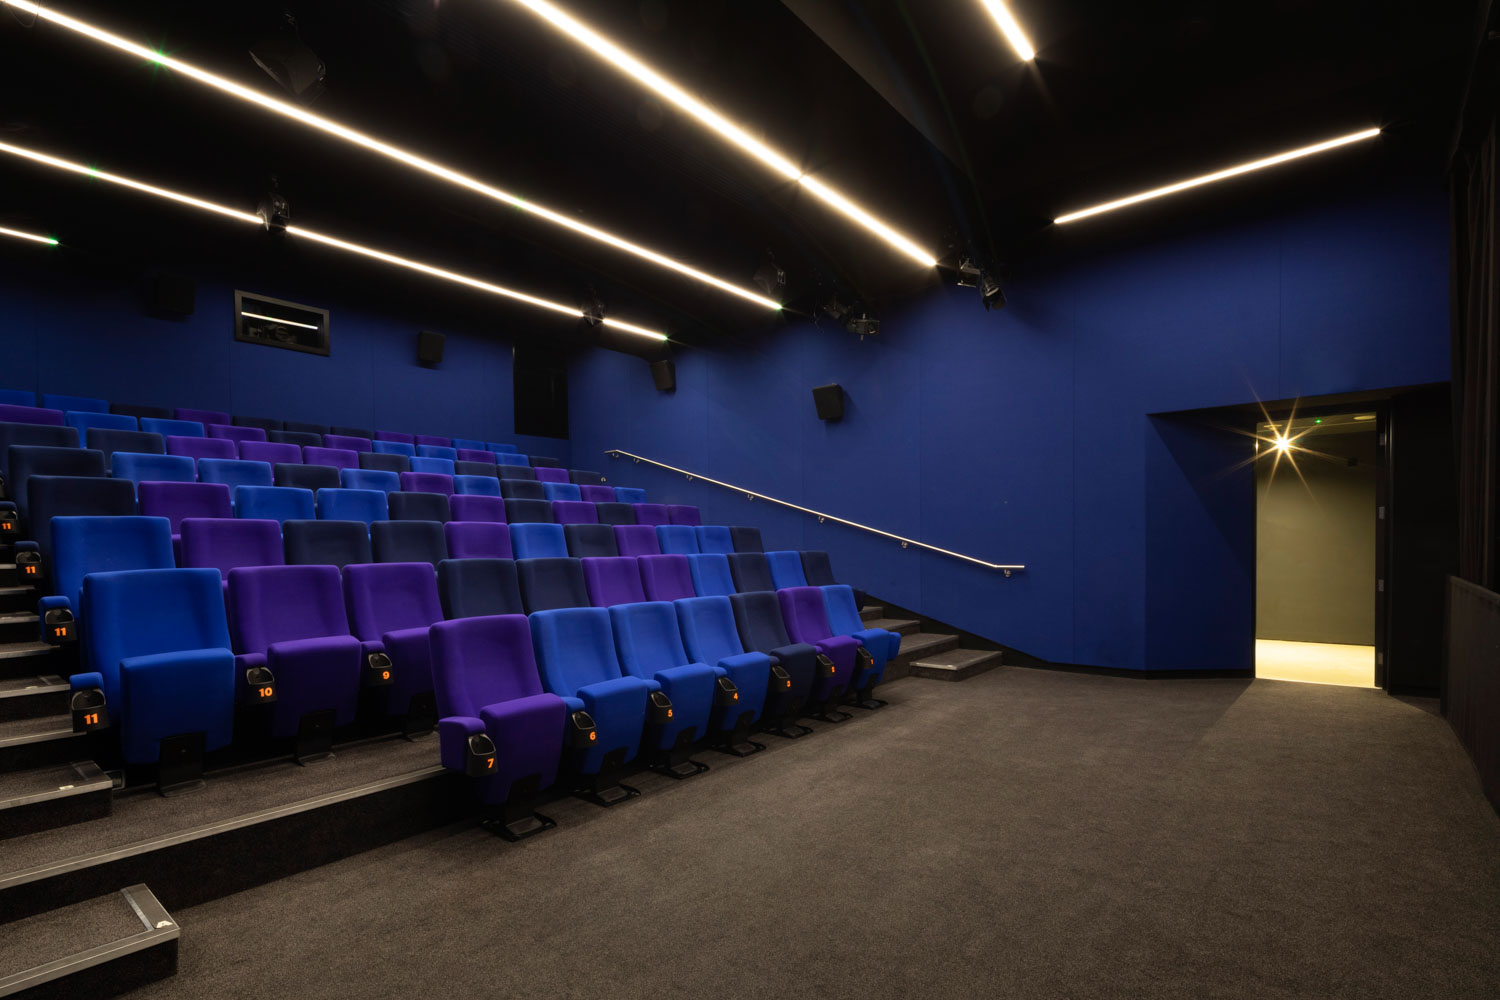 Towner Cinema auditorium, featuring around 80 cushioned seats which fold back